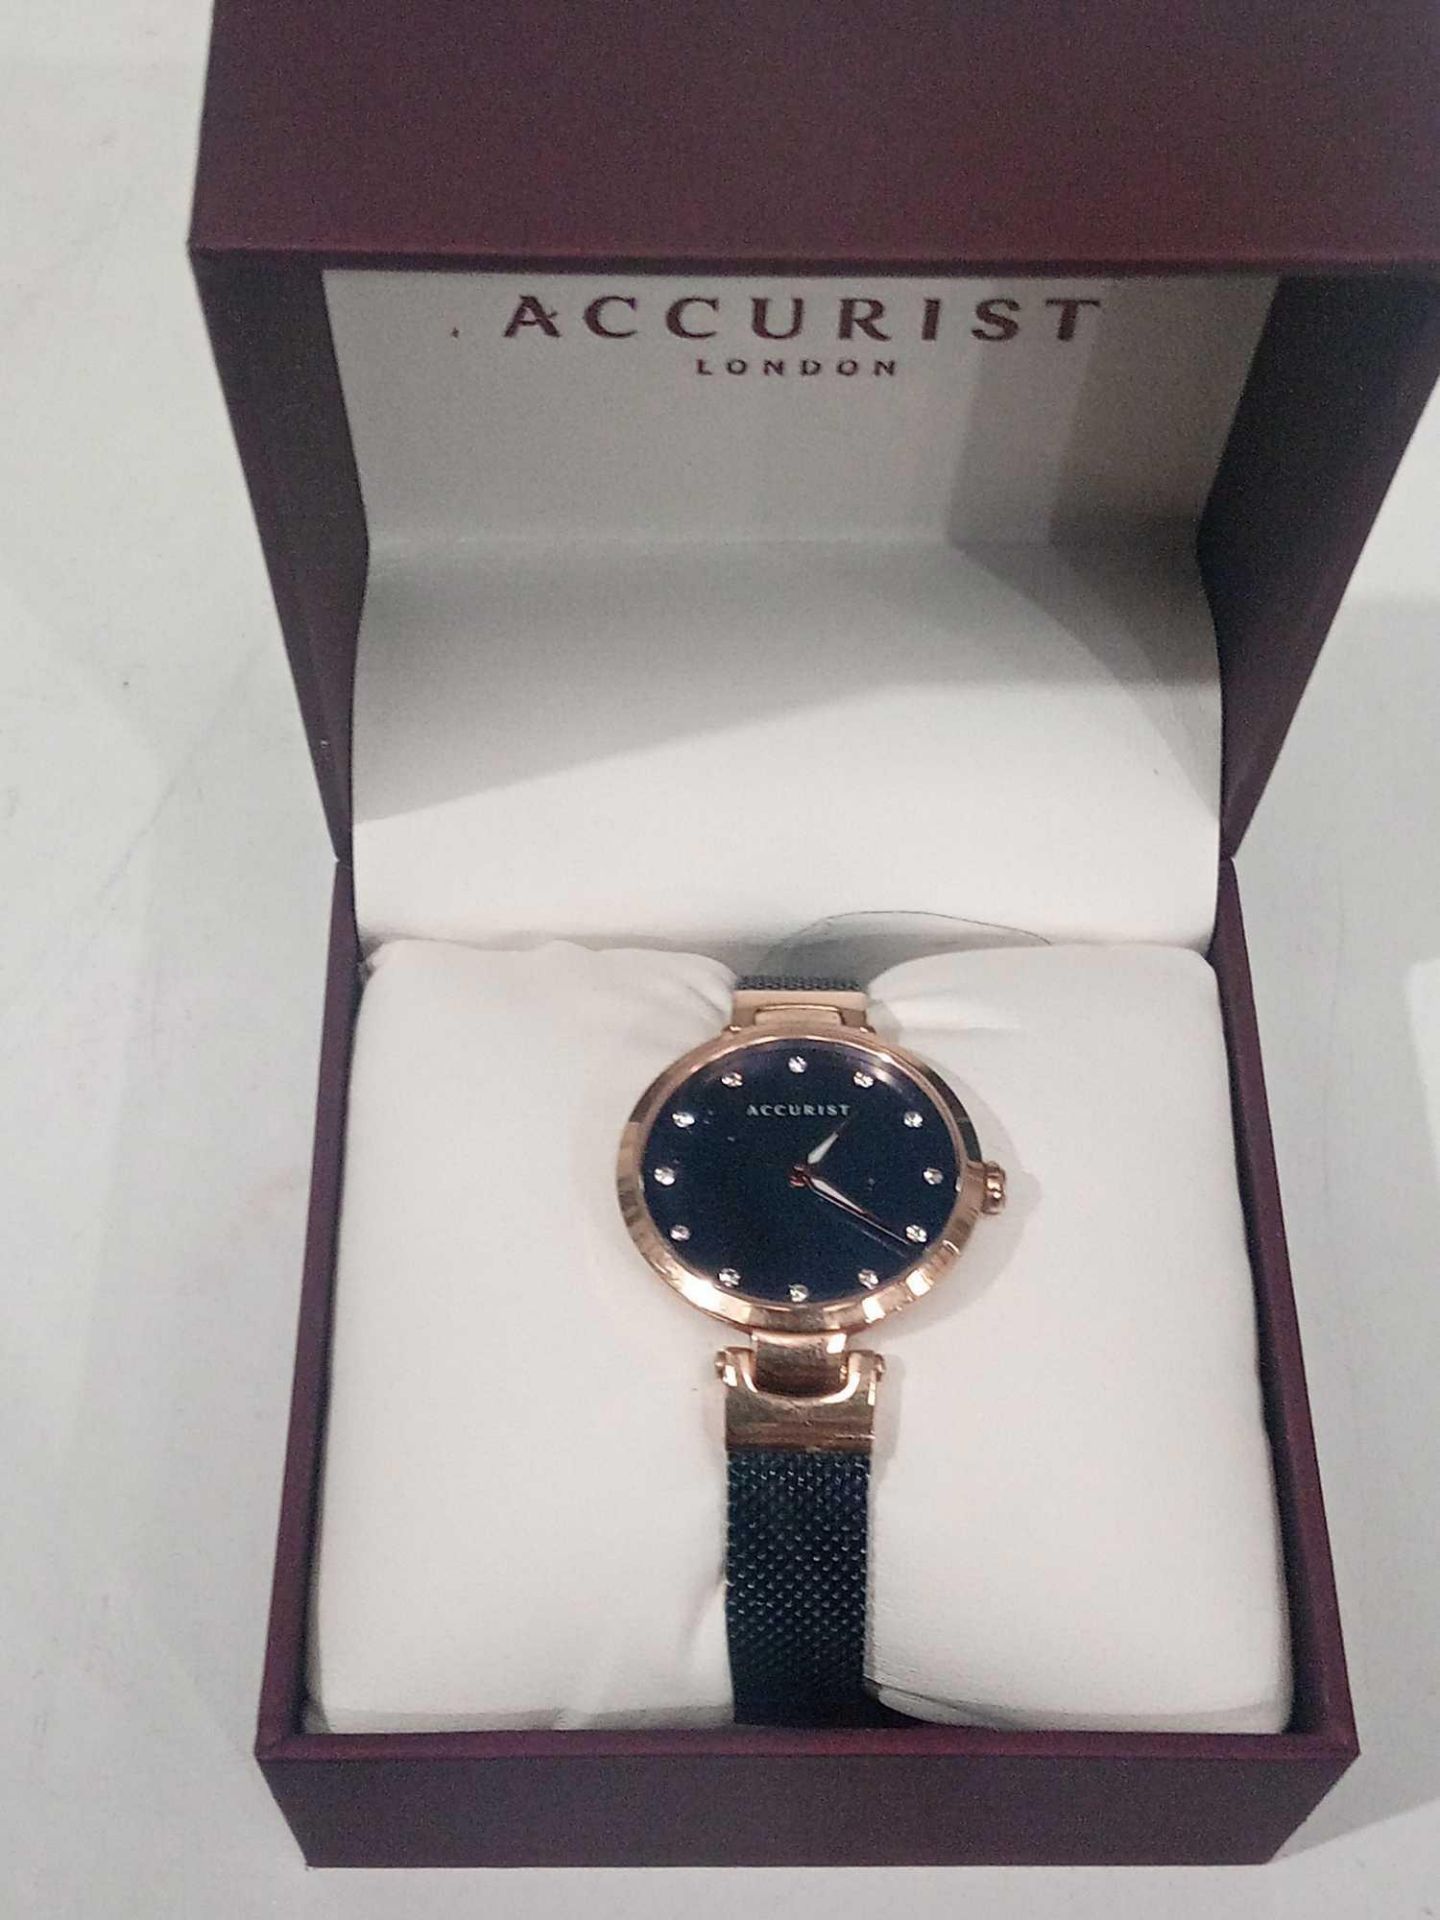 RRP £150 Boxed Accurist Gold Wrist Watch - Image 2 of 3